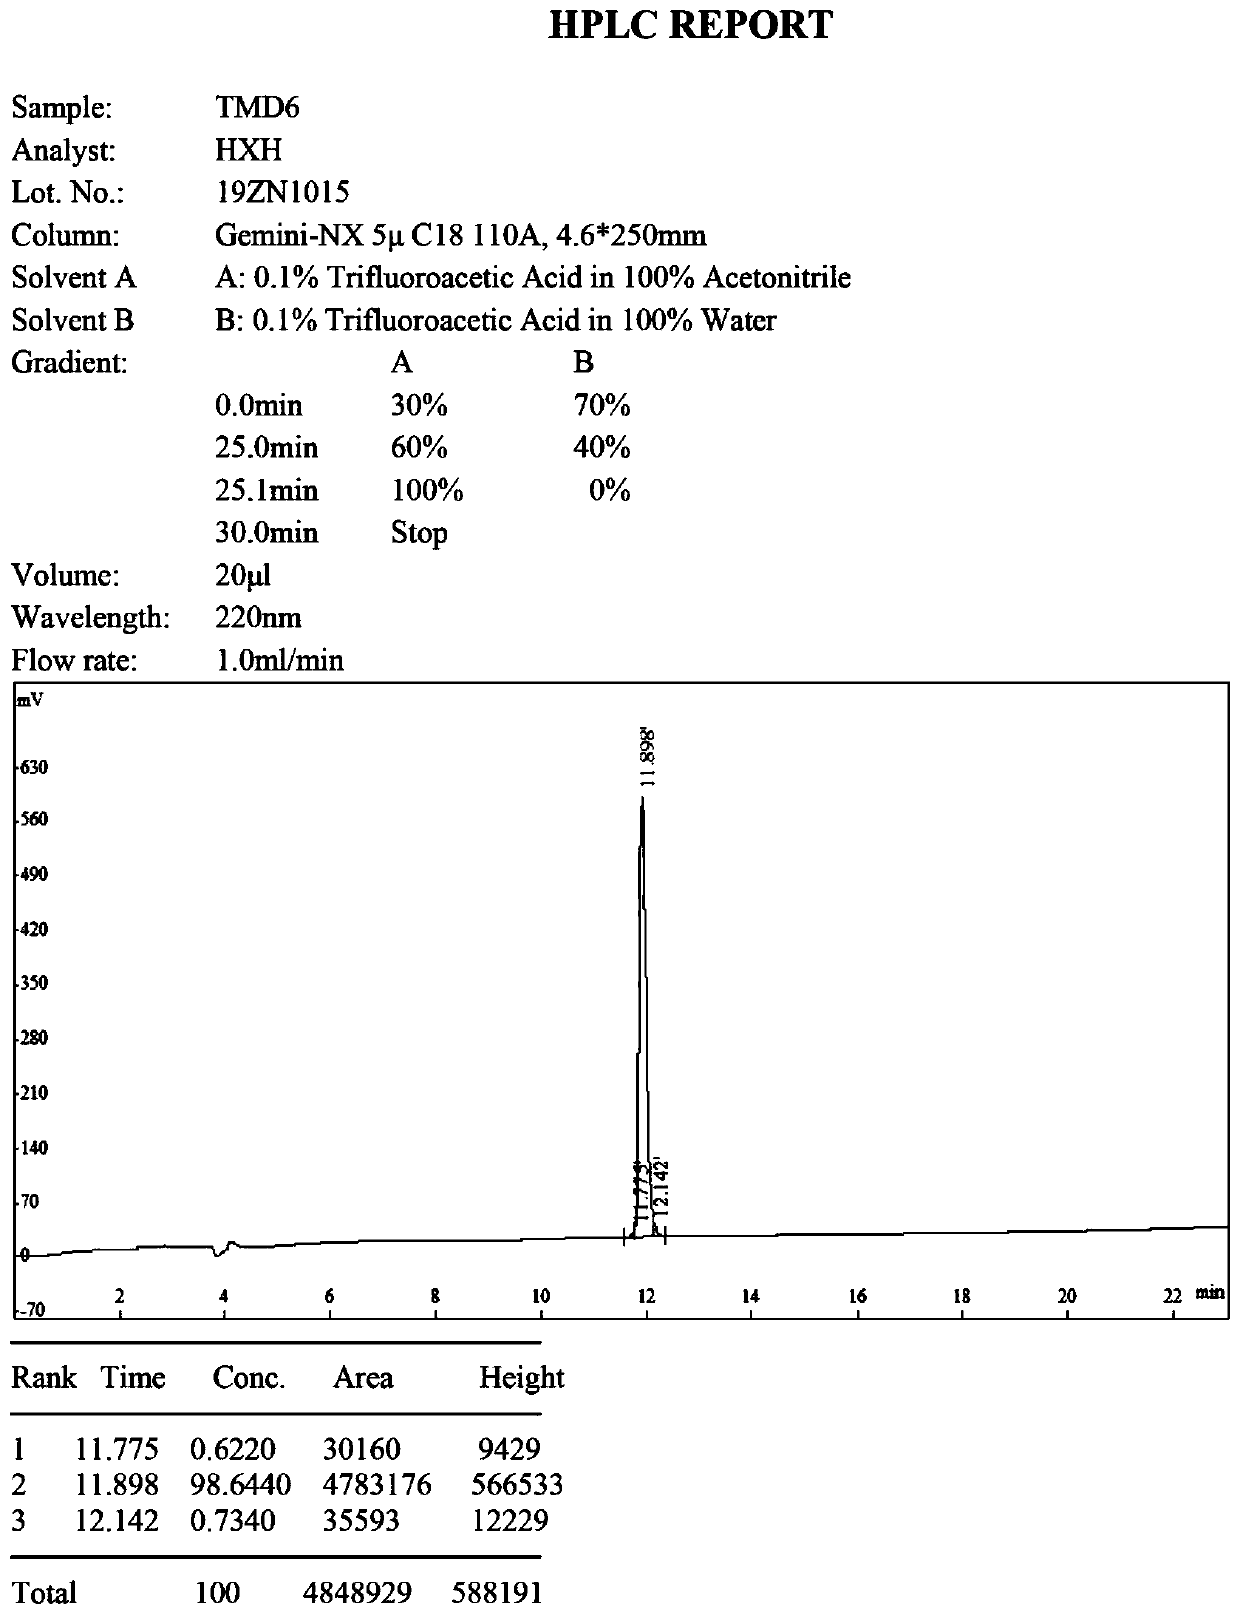 Anti-tumor polypeptide and application thereof in preparing anti-tumor drugs